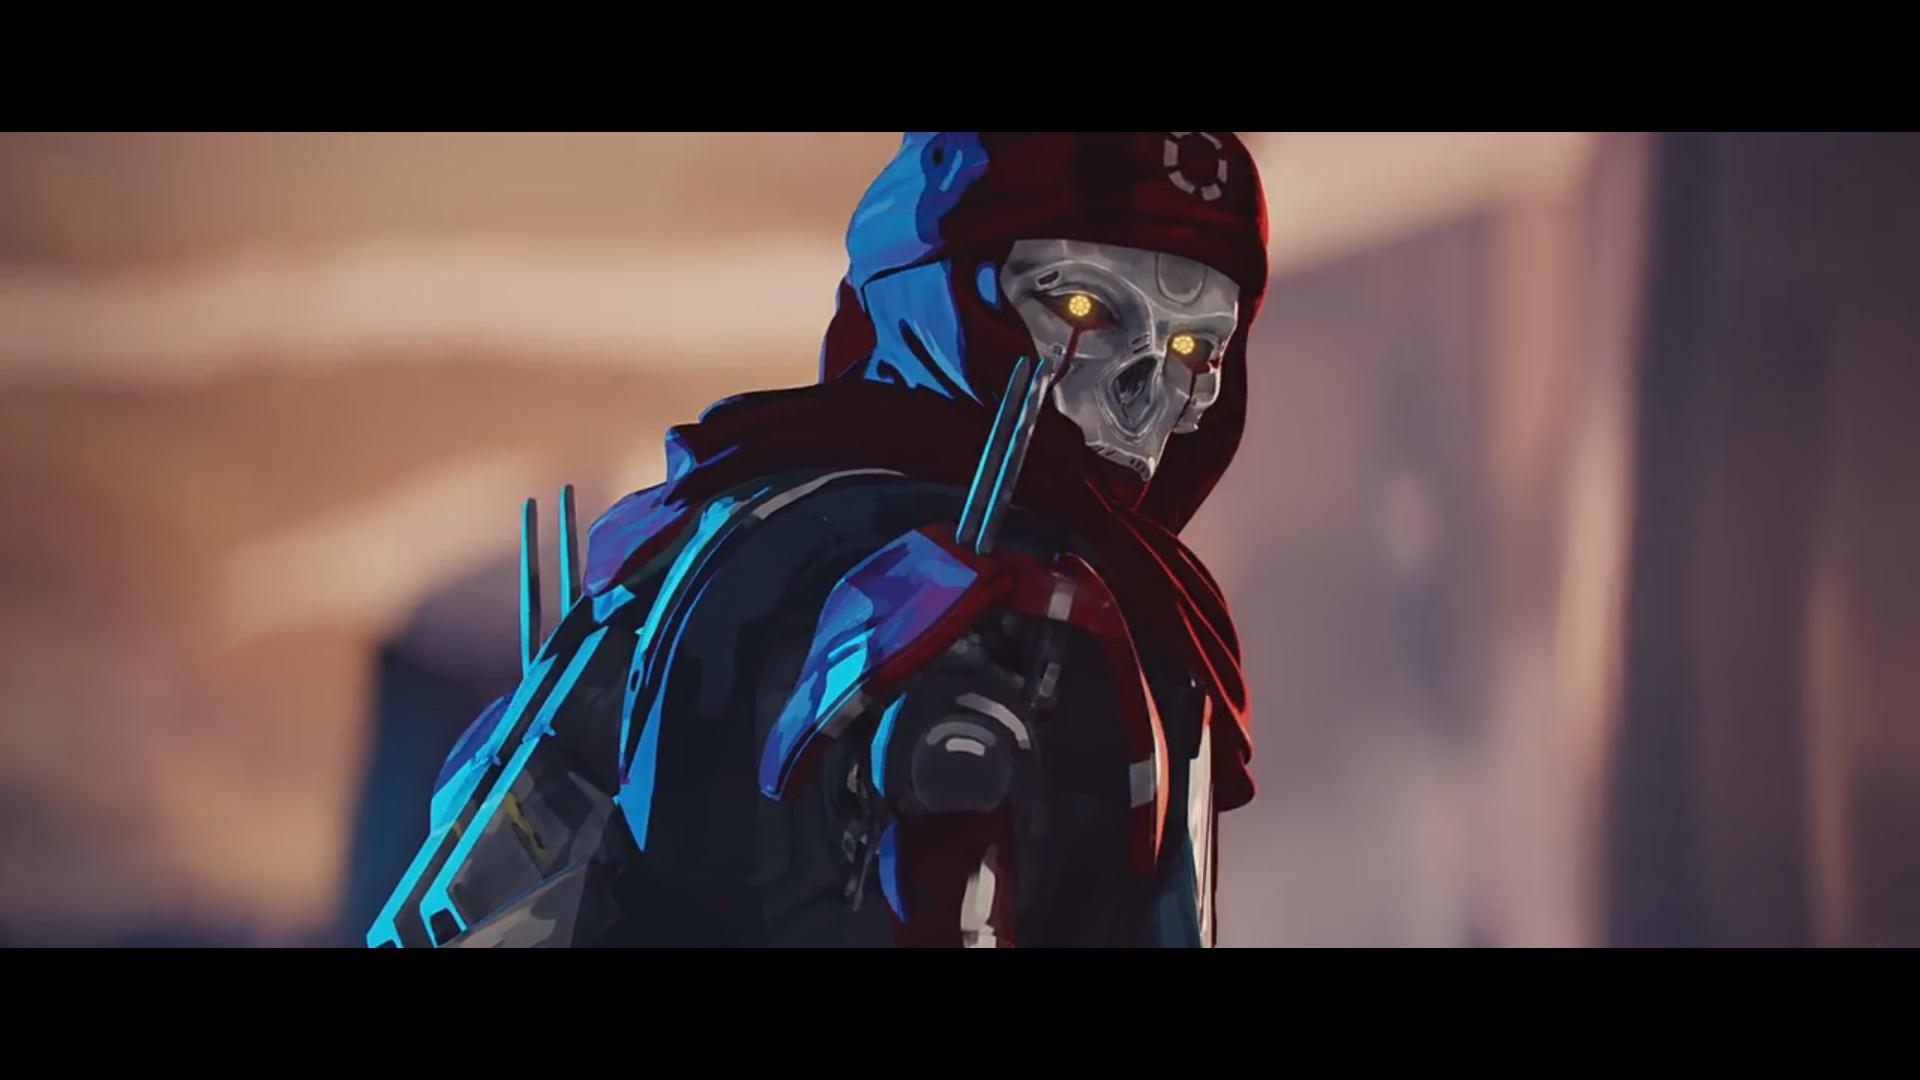 Apex Legends INTEL trailer was incredible! Well